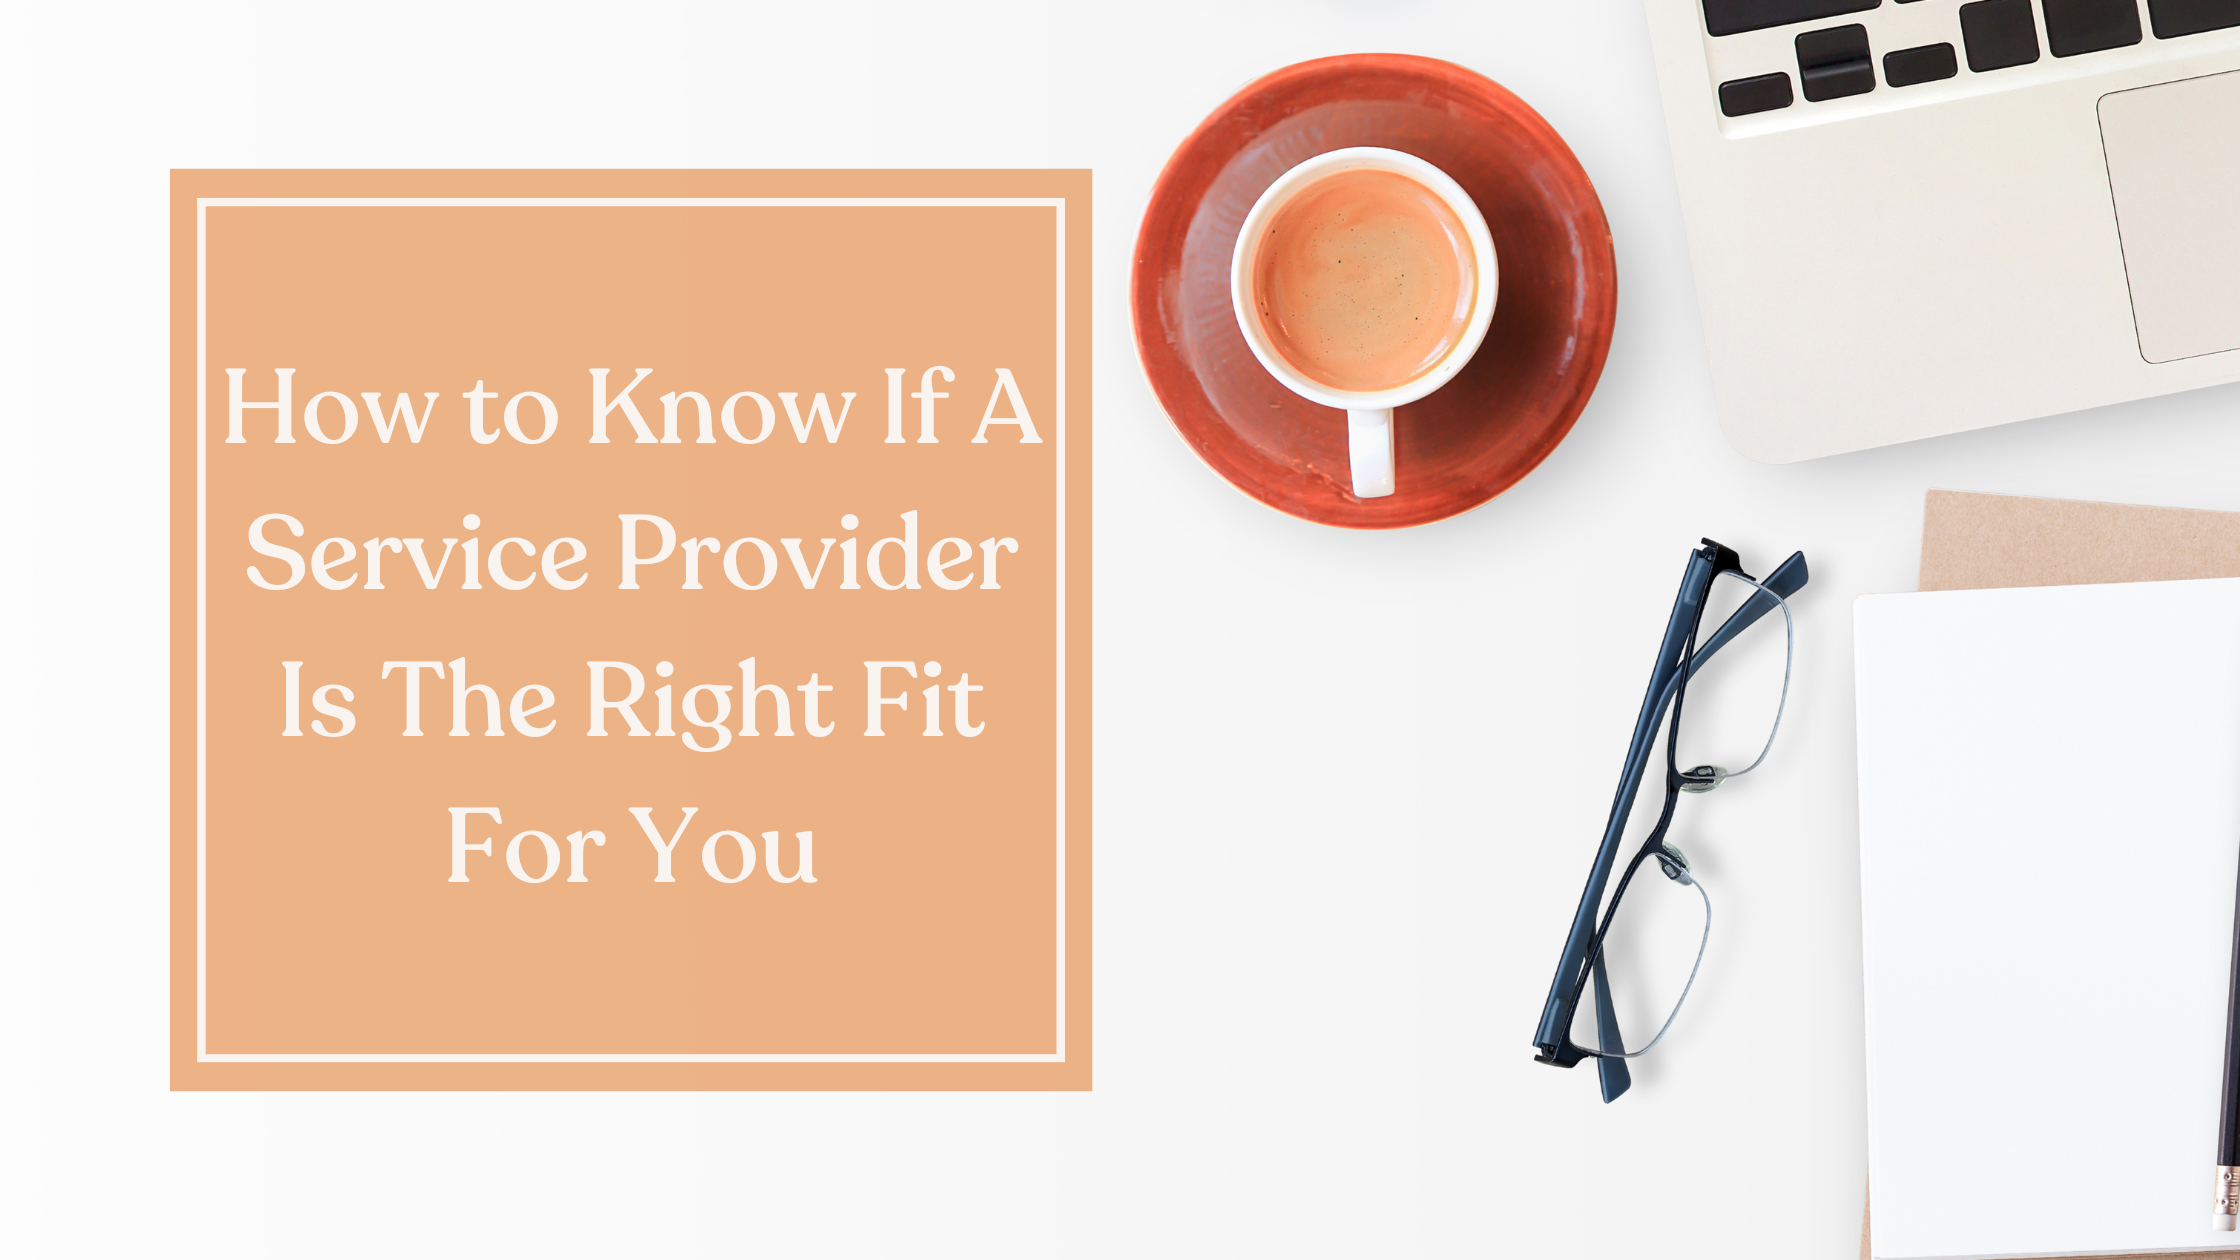 How to Know If A Service Provider Is The Right Fit For You